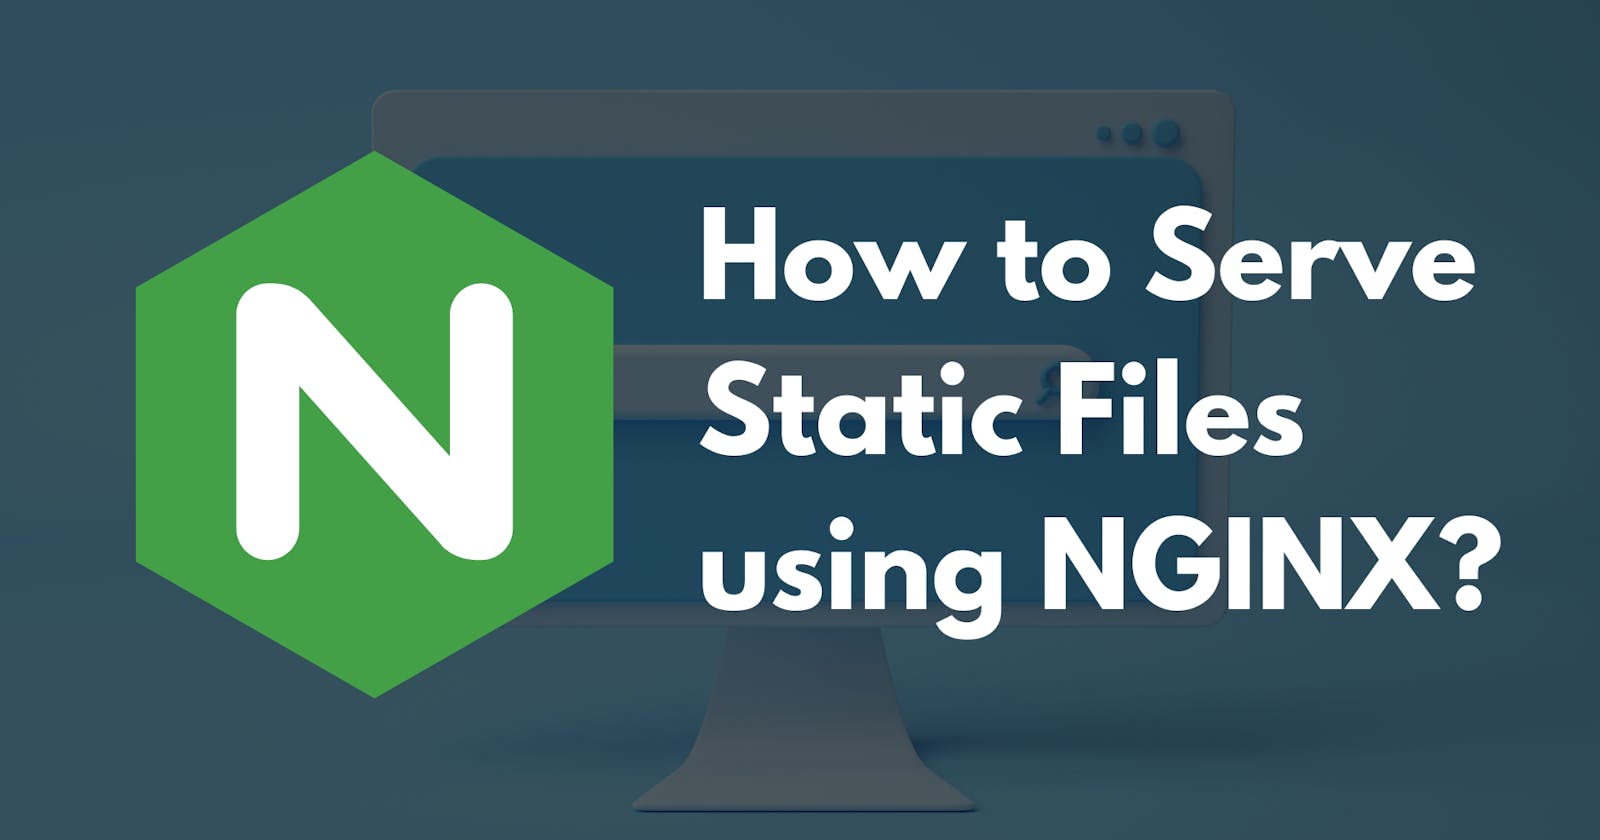 How to Serve Static Files using NGINX in 3 Simple Steps? 💡